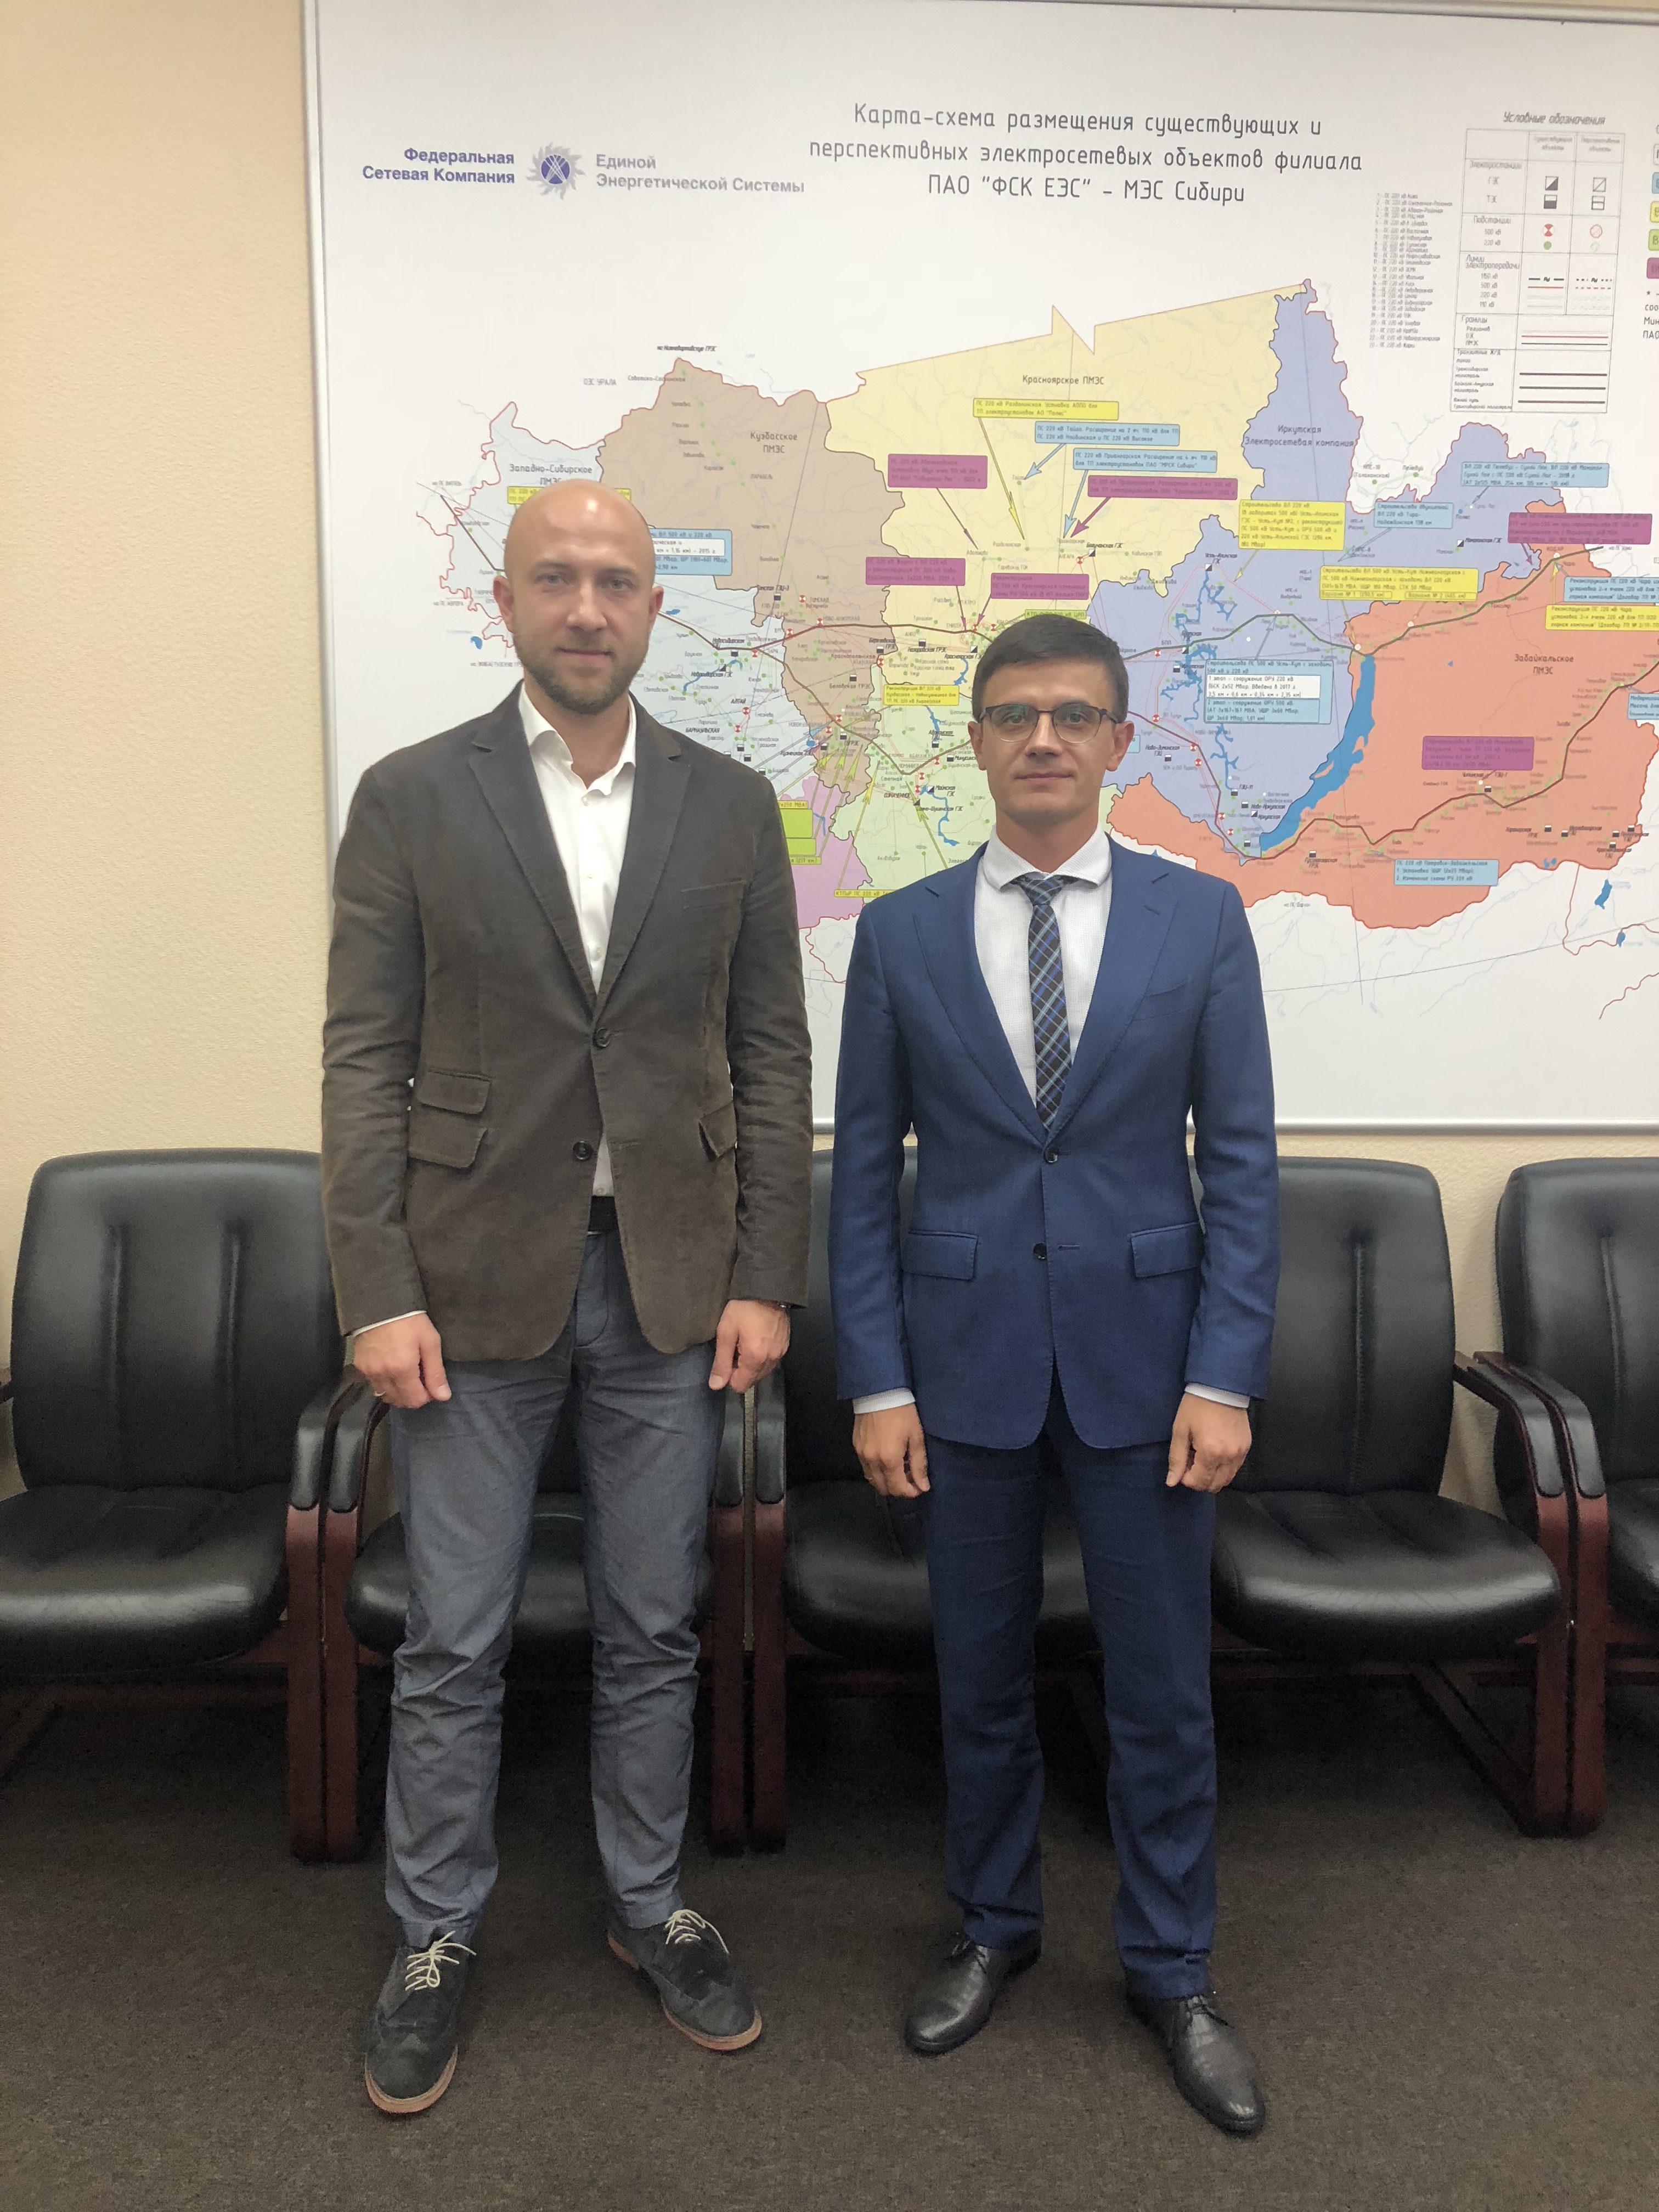 Alexander Savinov (L) and Chief Engineer of MPS Siberia Alexander Terskov during a business meeting at the head office of MPS Siberia